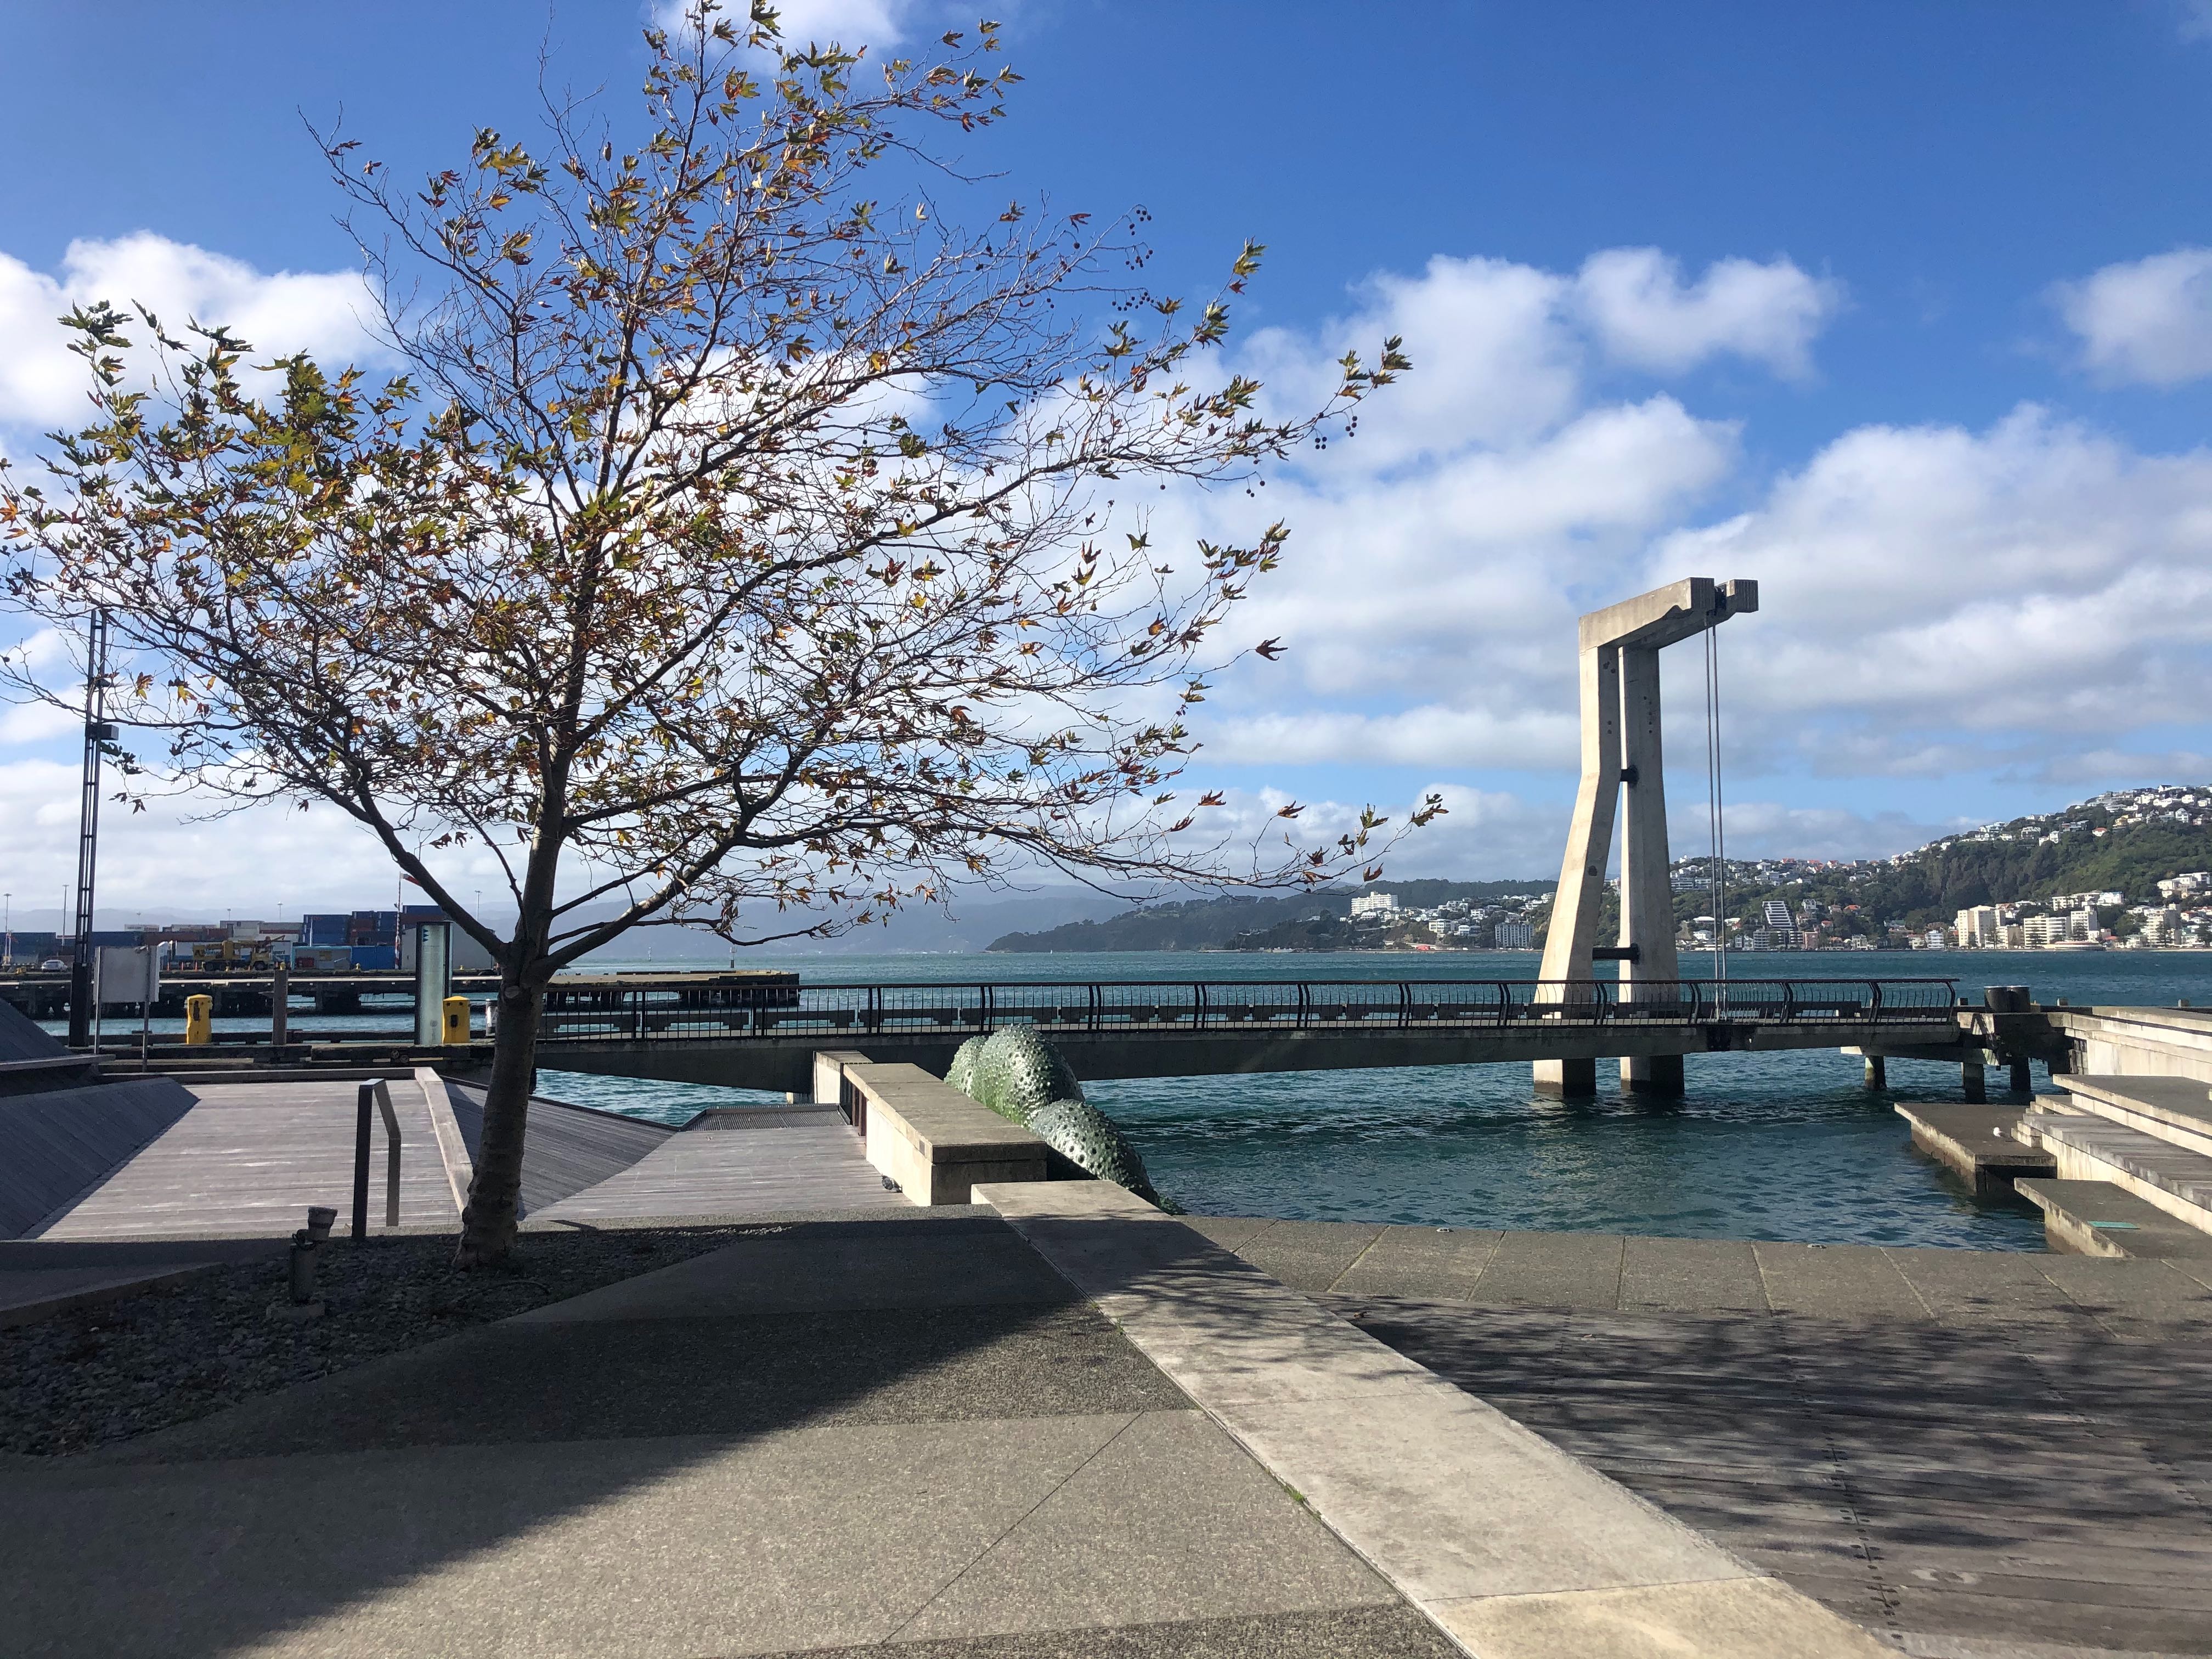 A near deserted waterfront on Thursday morning in New Zealand's capital, Wellington, following an easing of lockdown restrictions in the country.